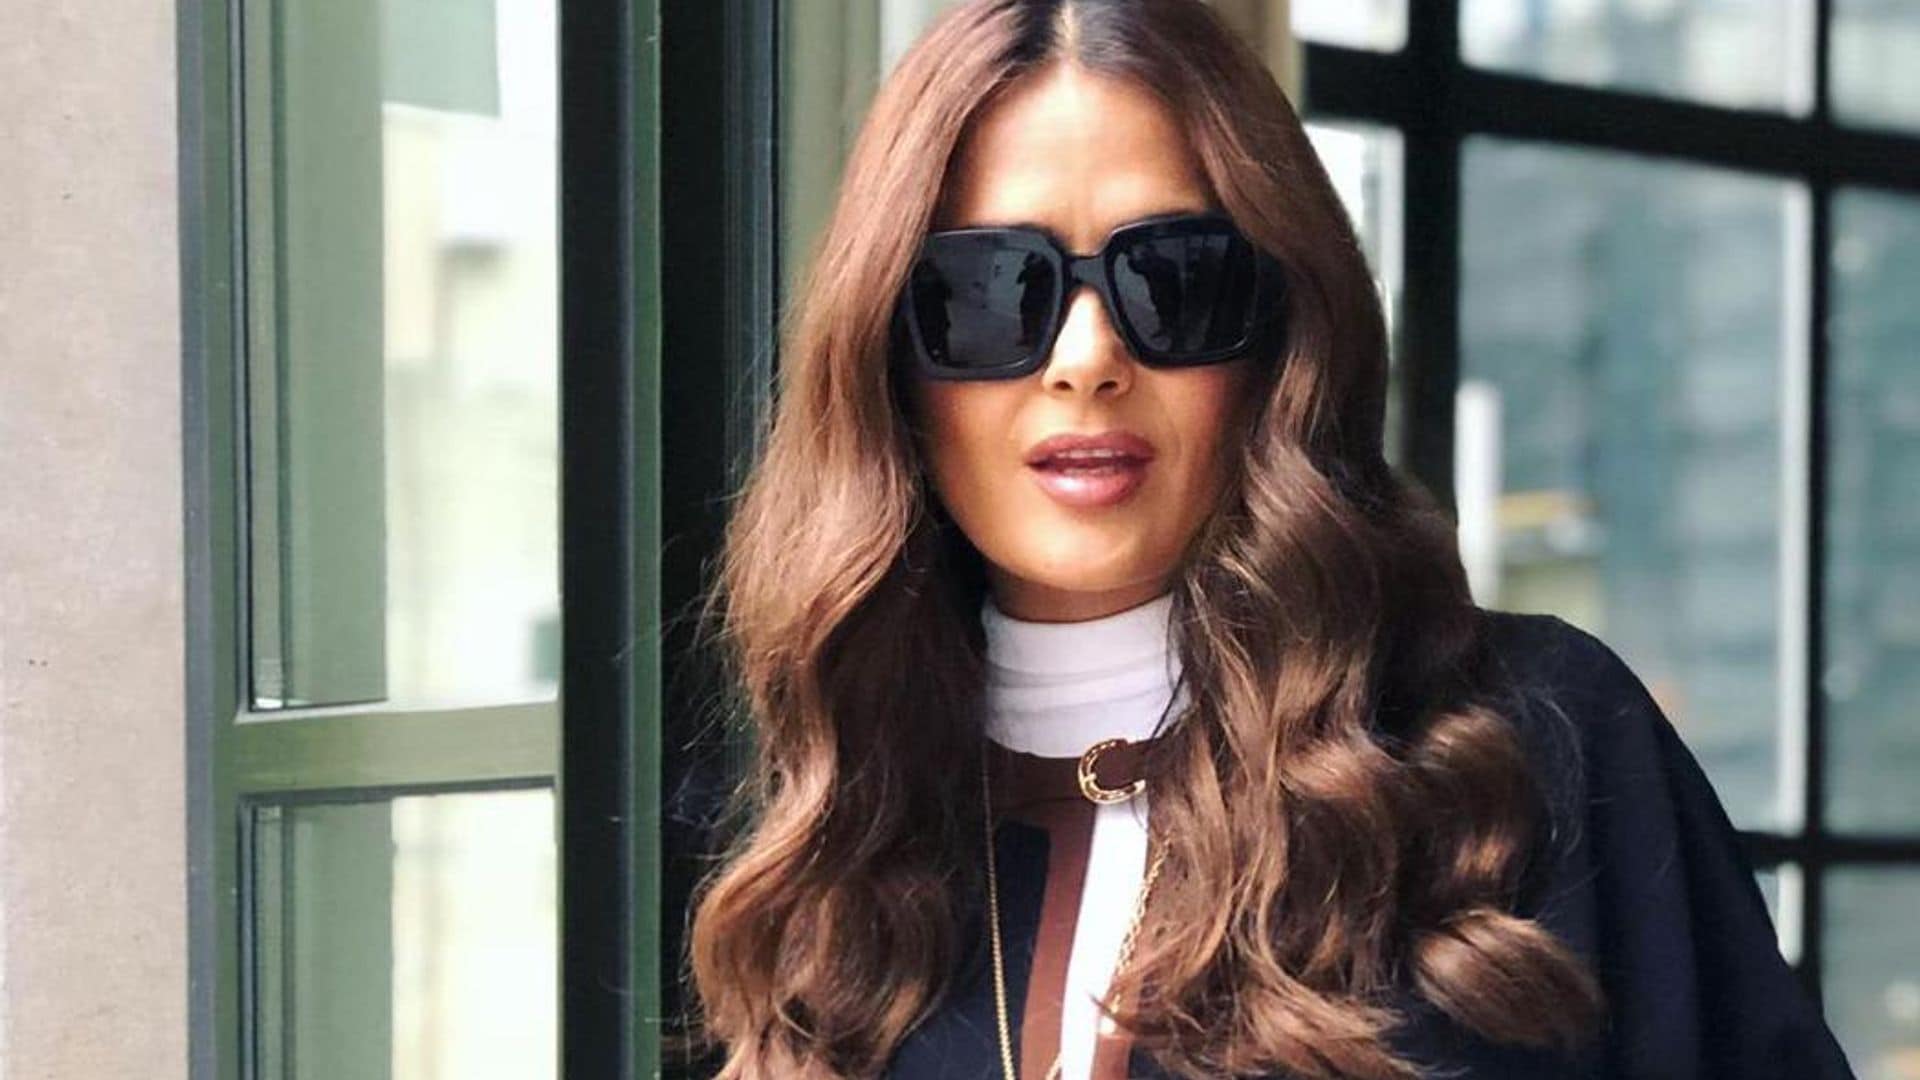 Salma Hayek takes NYC by storm with boss style and beyond powerful accessory